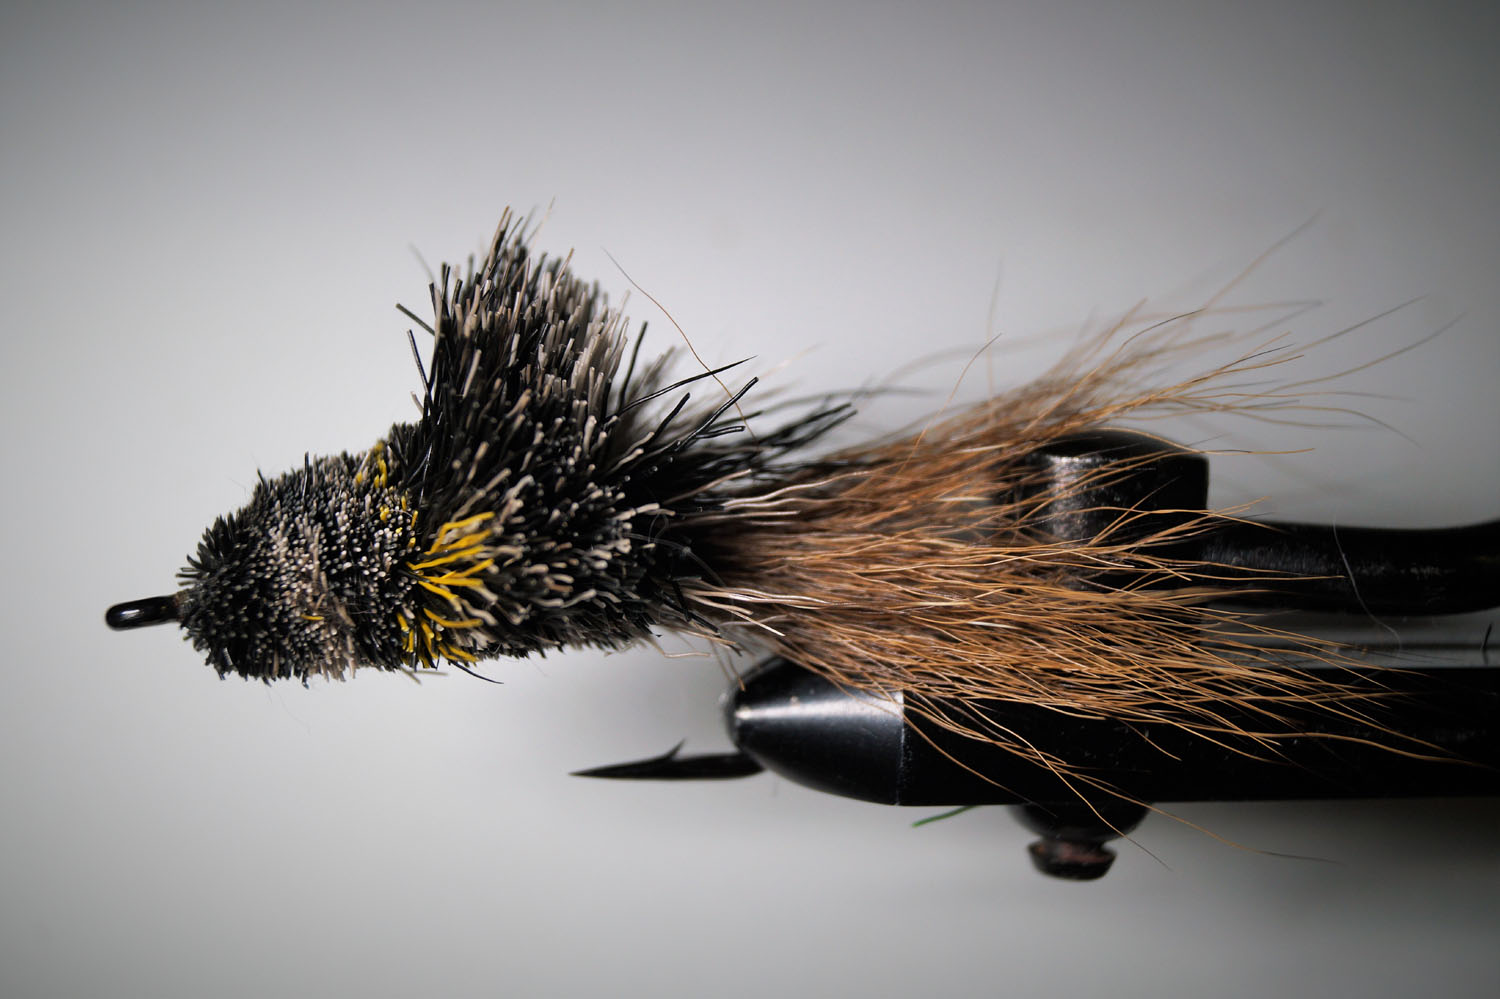 Dahlberg size 4/0 with bucktail